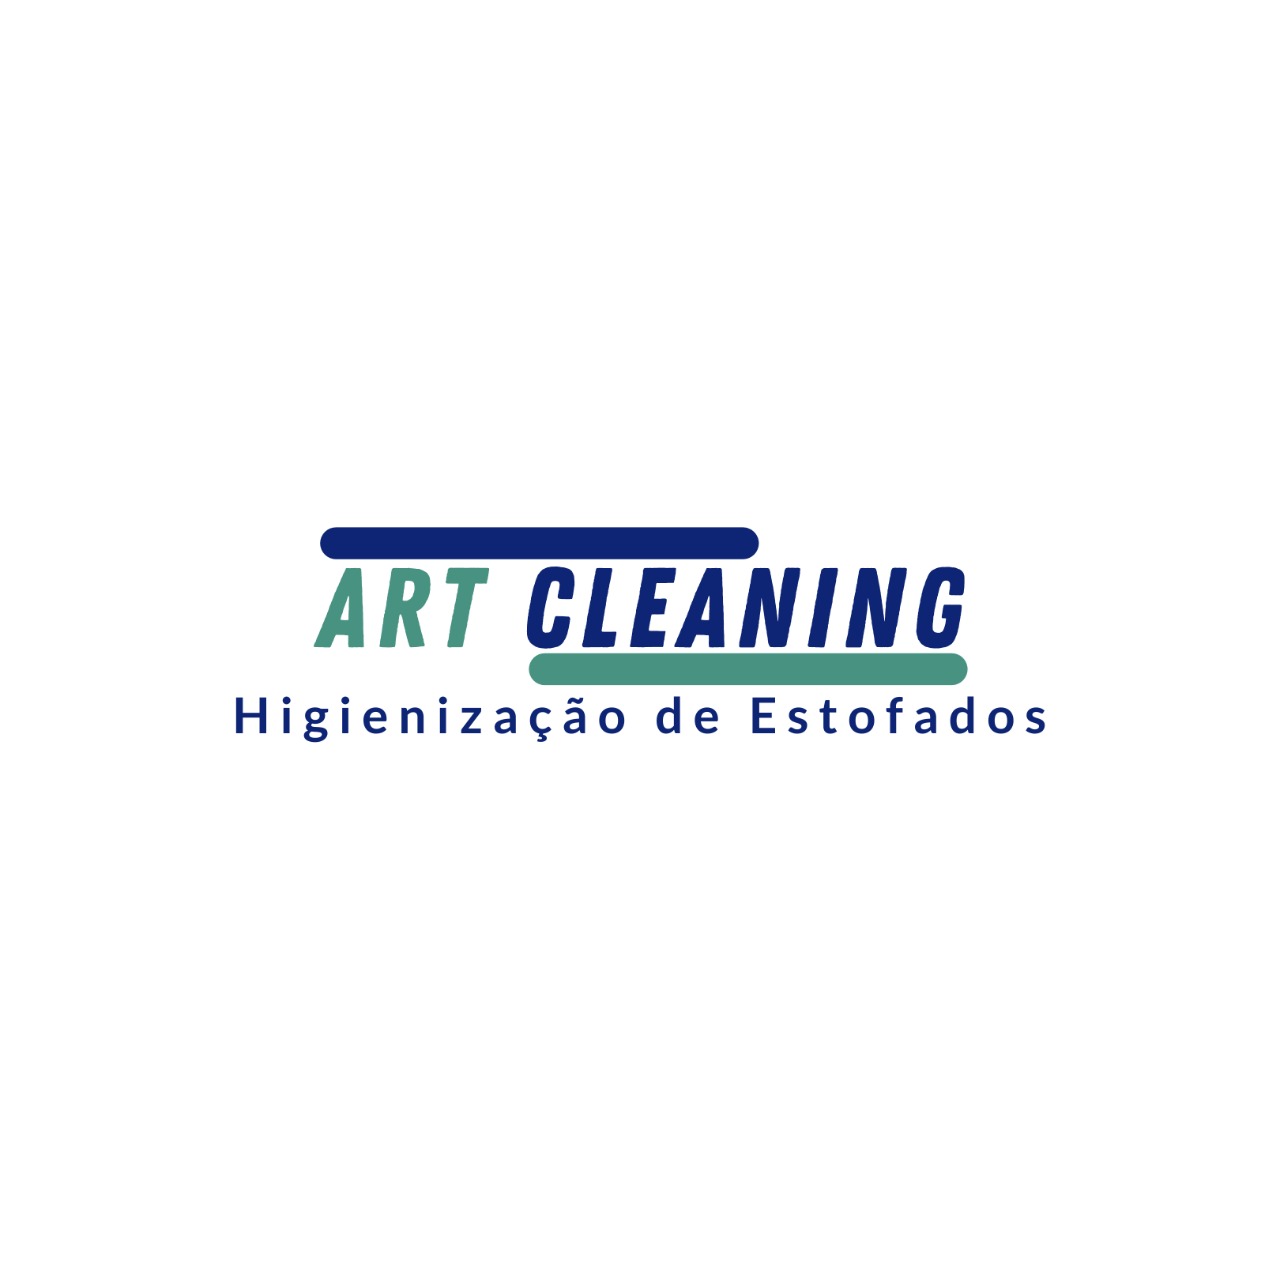 Art Cleaning